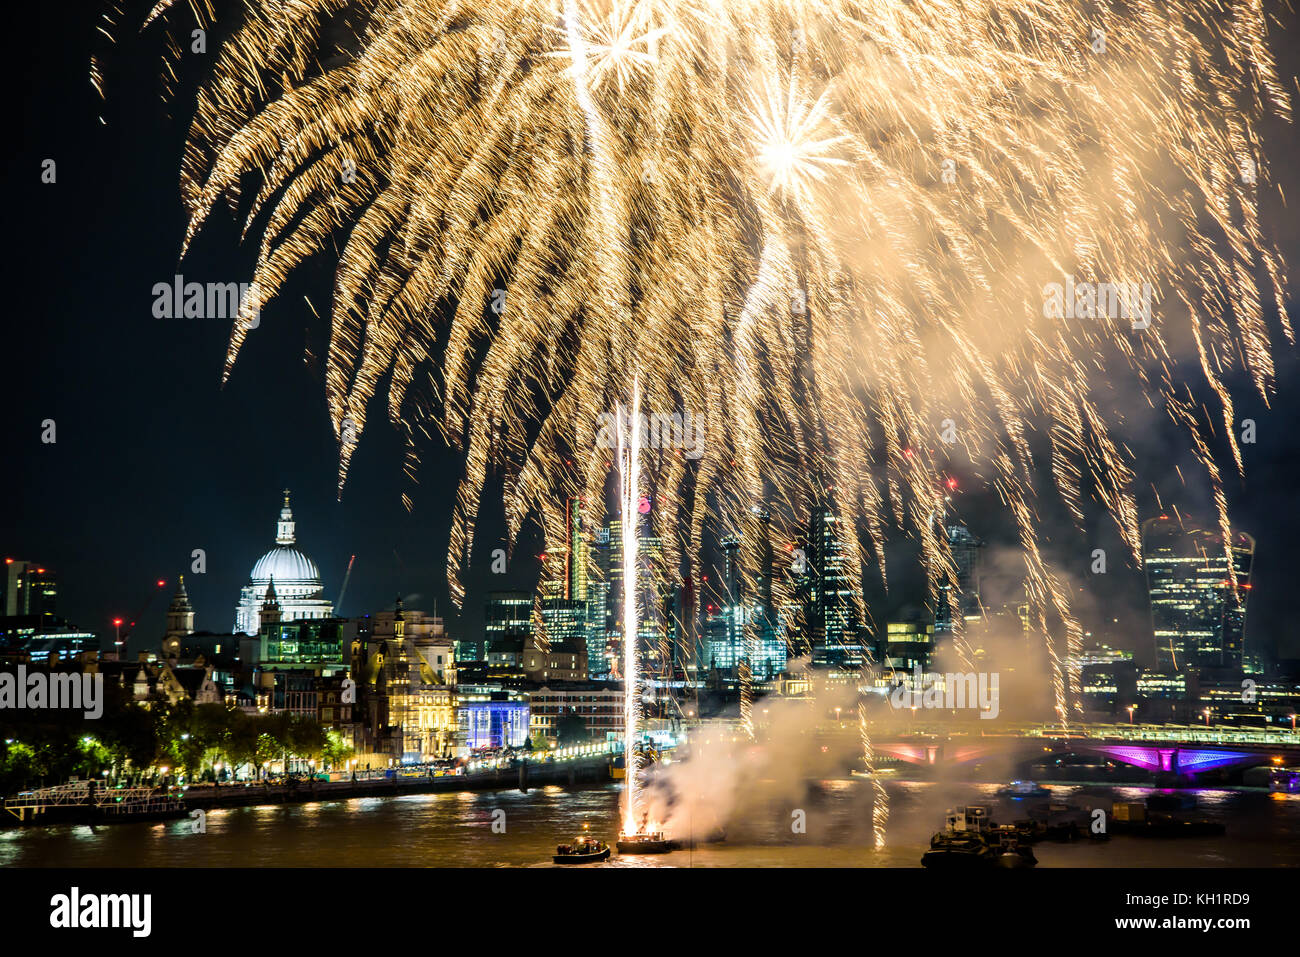 A spectacular fireworks display closes the annual celebrations for Lord Mayor's Show in London, England Stock Photo